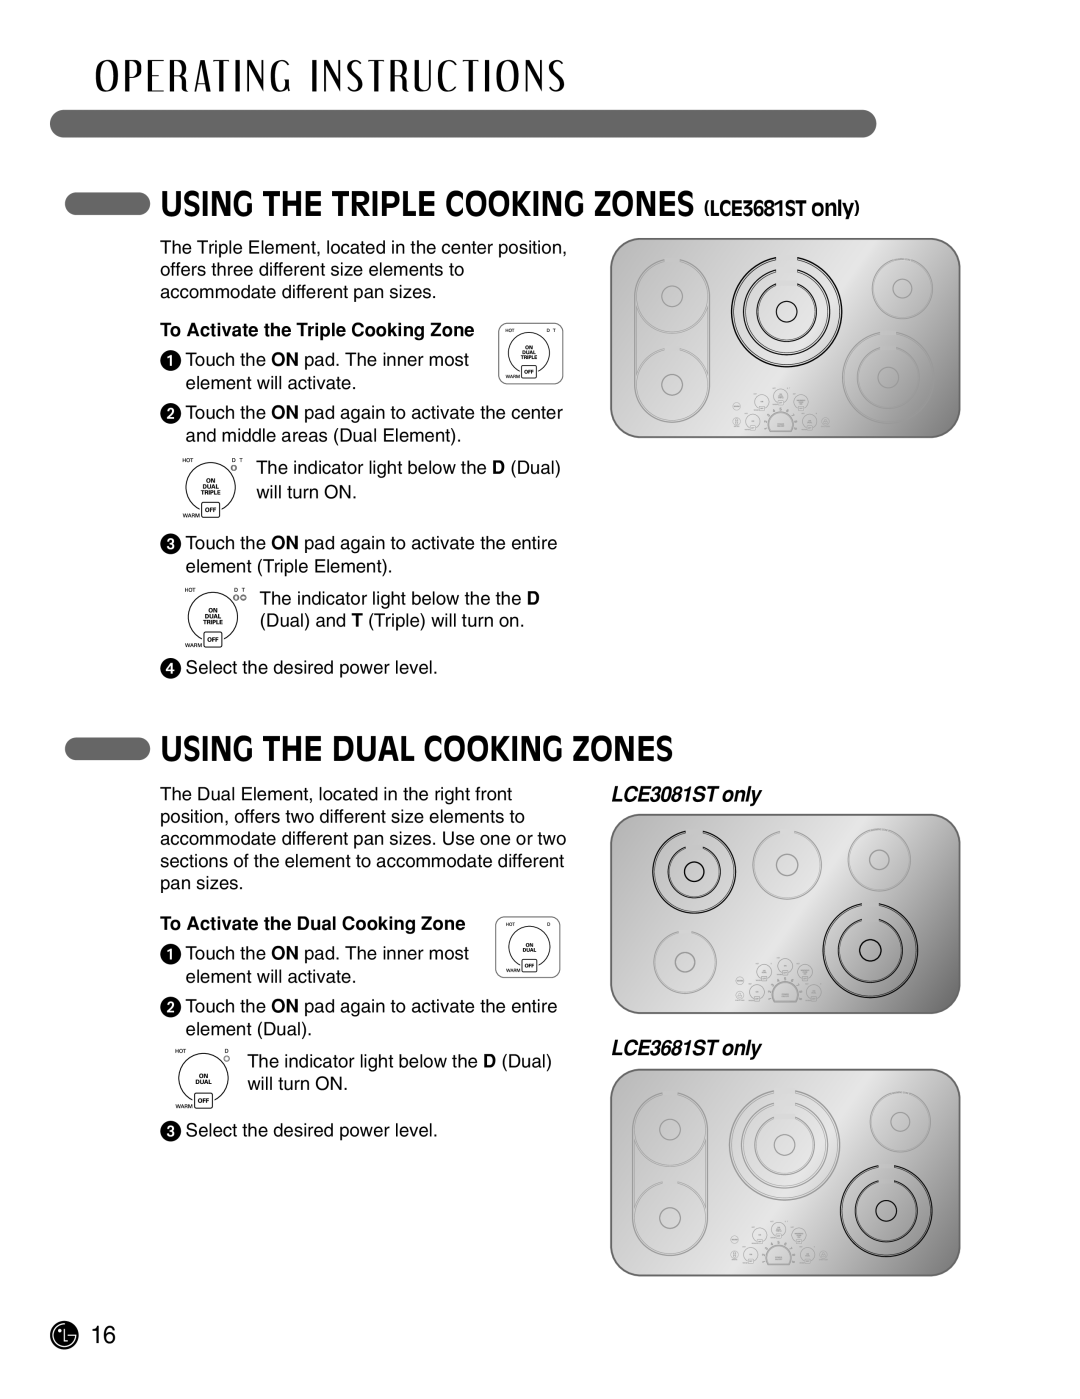 LG Electronics manual USING THE TRIPLE COOKING ZONES LCE3681ST only, Using The Dual Cooking Zones, LCE3081ST only 